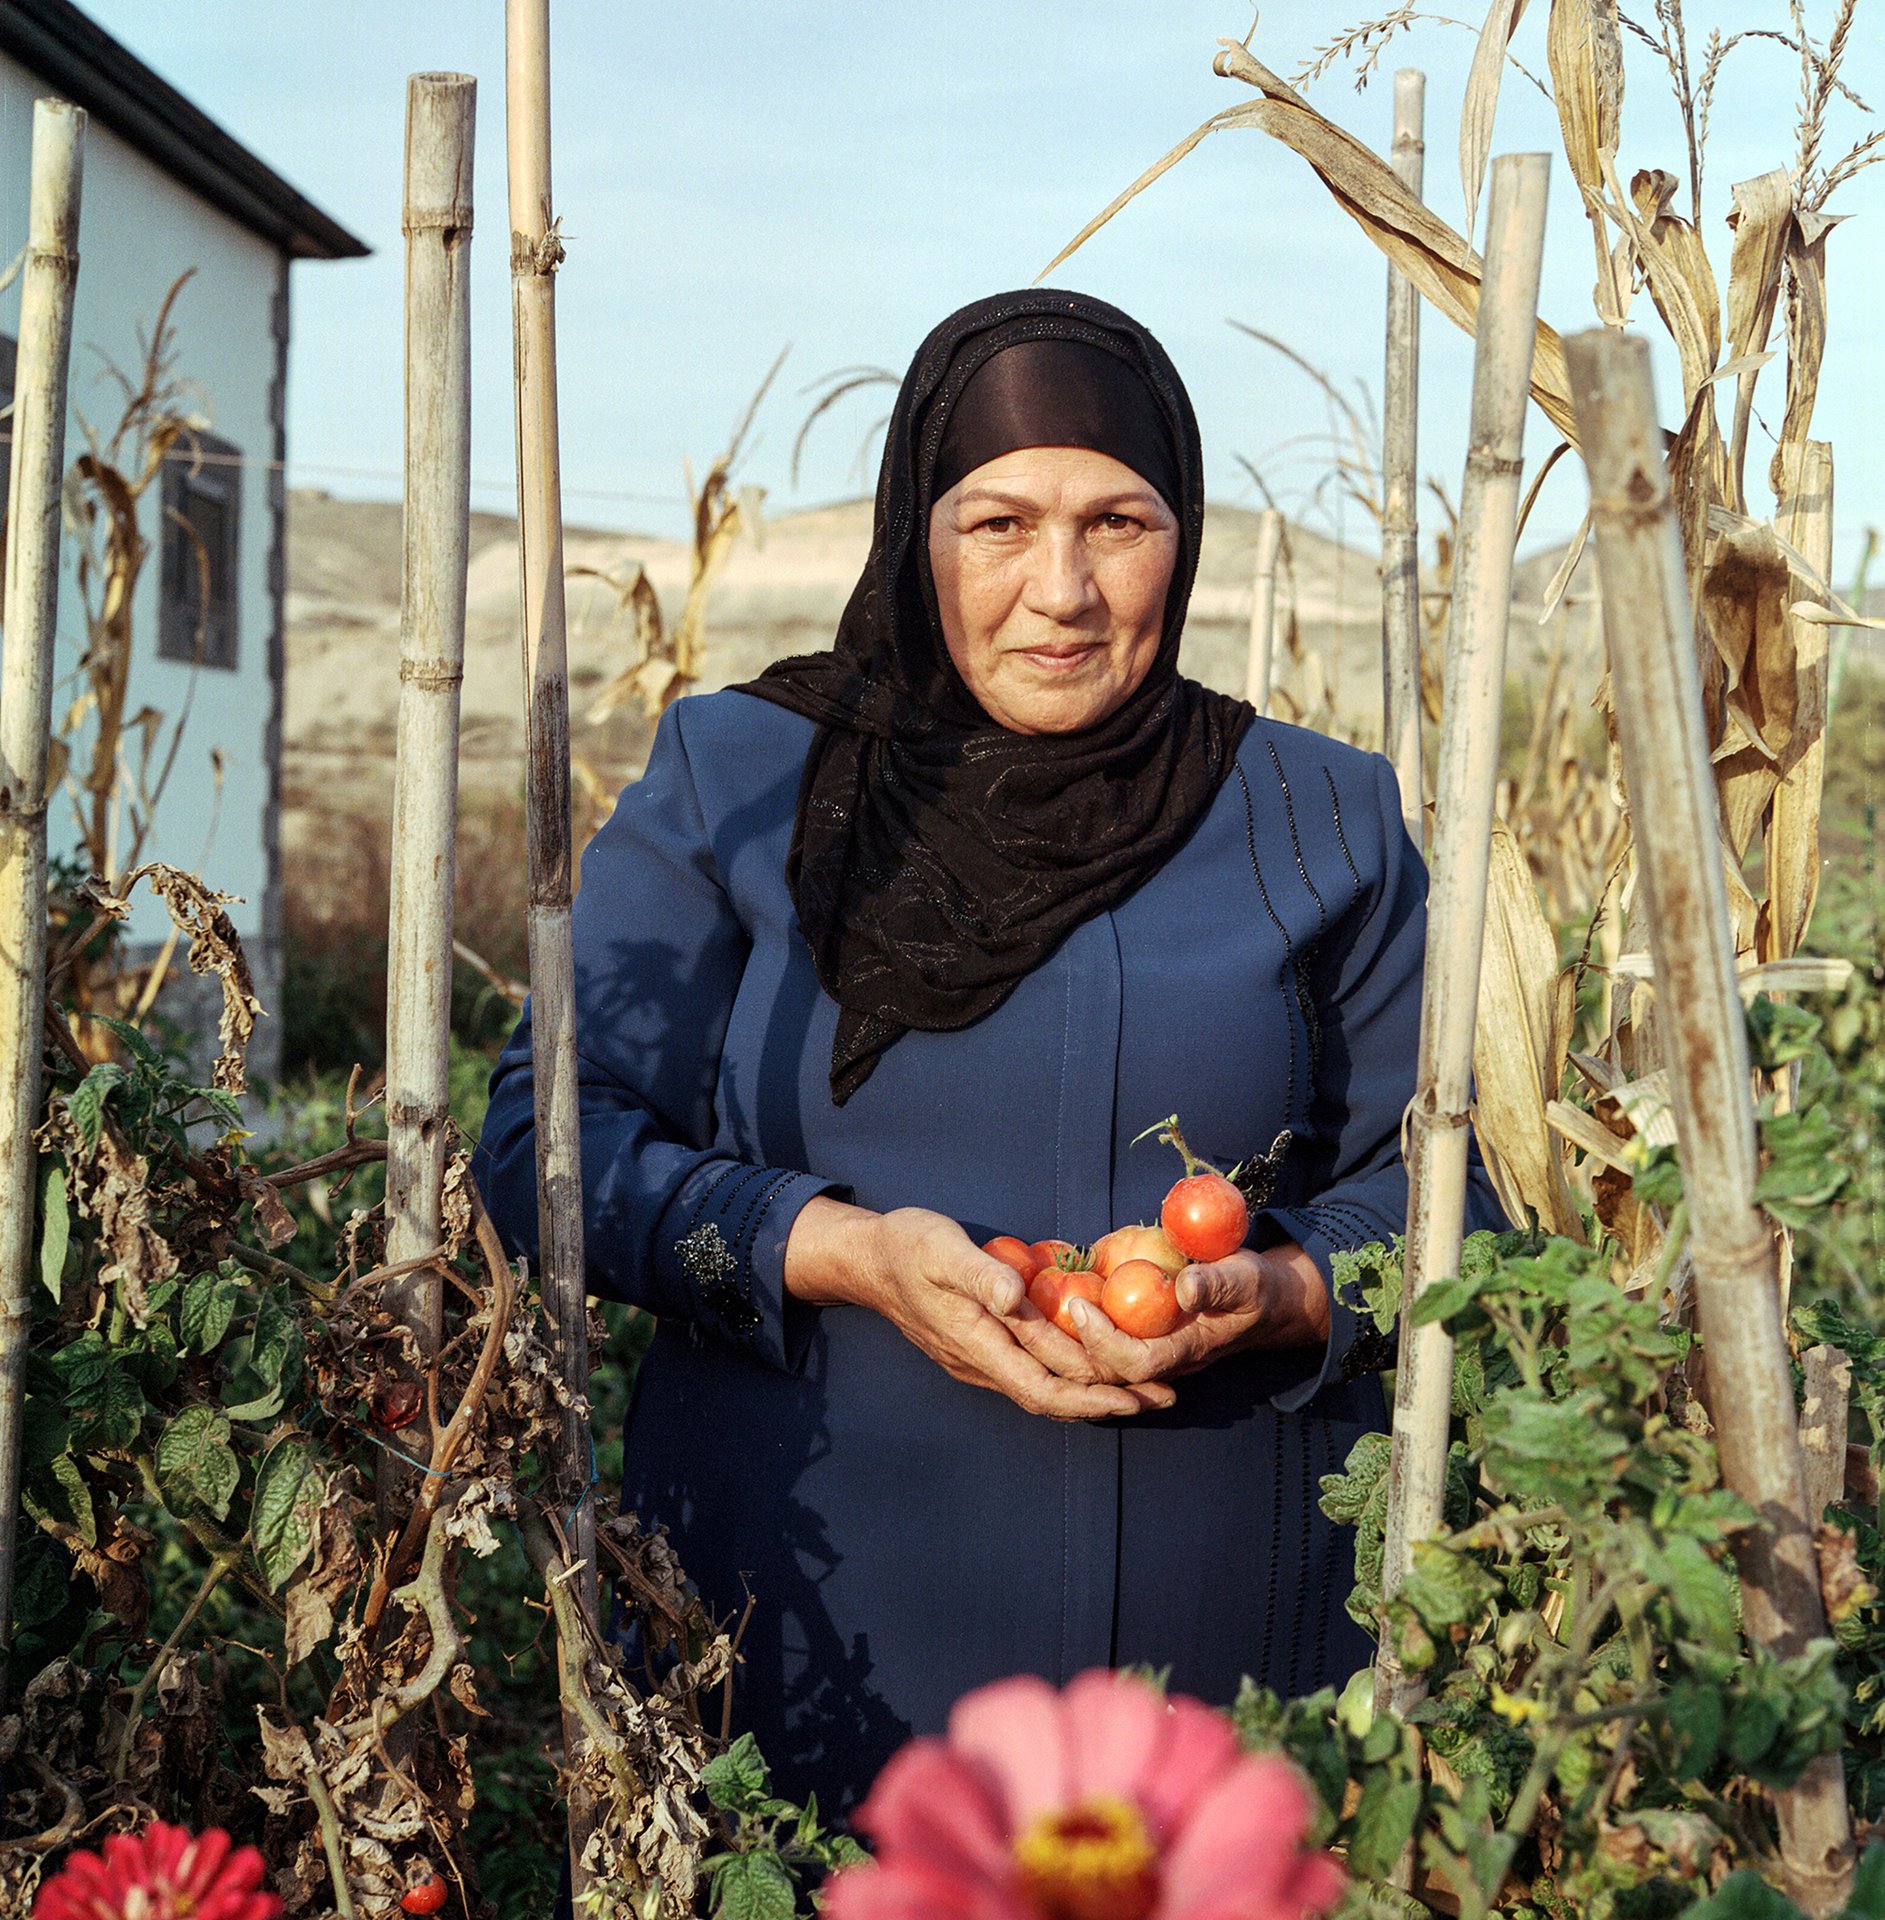 Firengiz Salimova in her village of Agali in the district of Zangilan, Azerbaijan. Internally displaced during the First Nagorno-Karabakh War in 1993, Salimova returned to Agali after it was reclaimed by Azerbaijan in 2020.